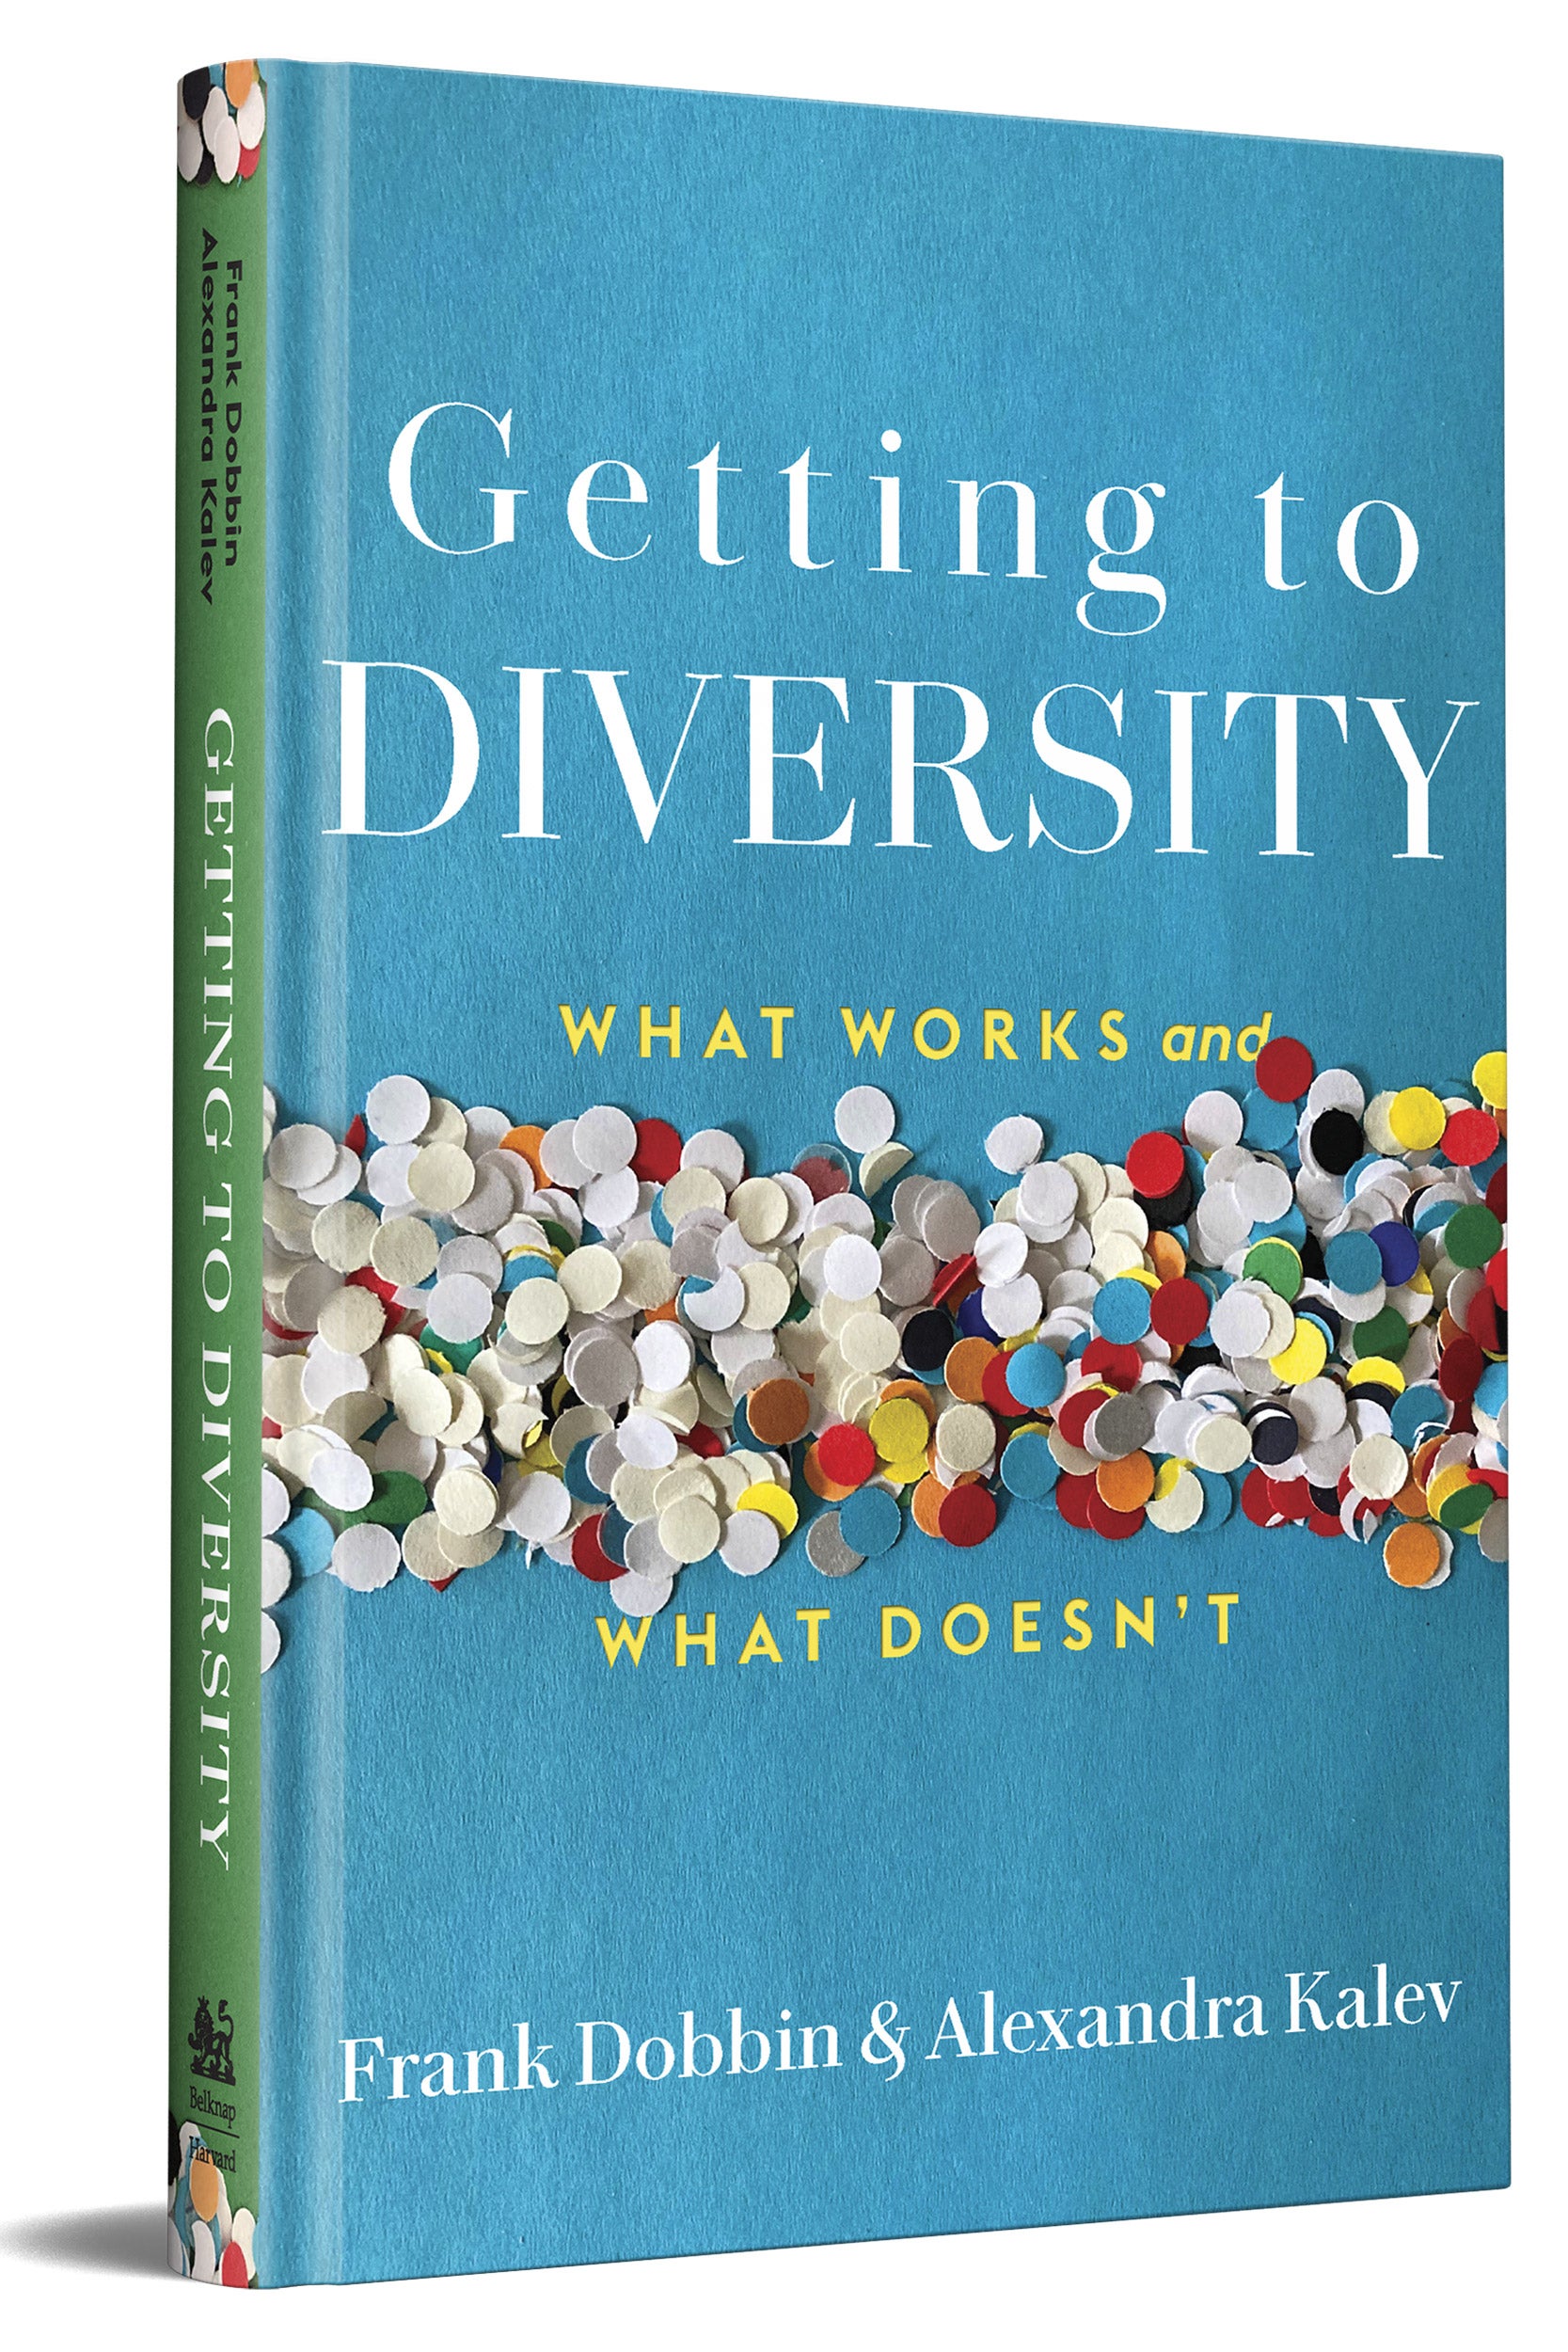 Getting to Diversity bookcover.